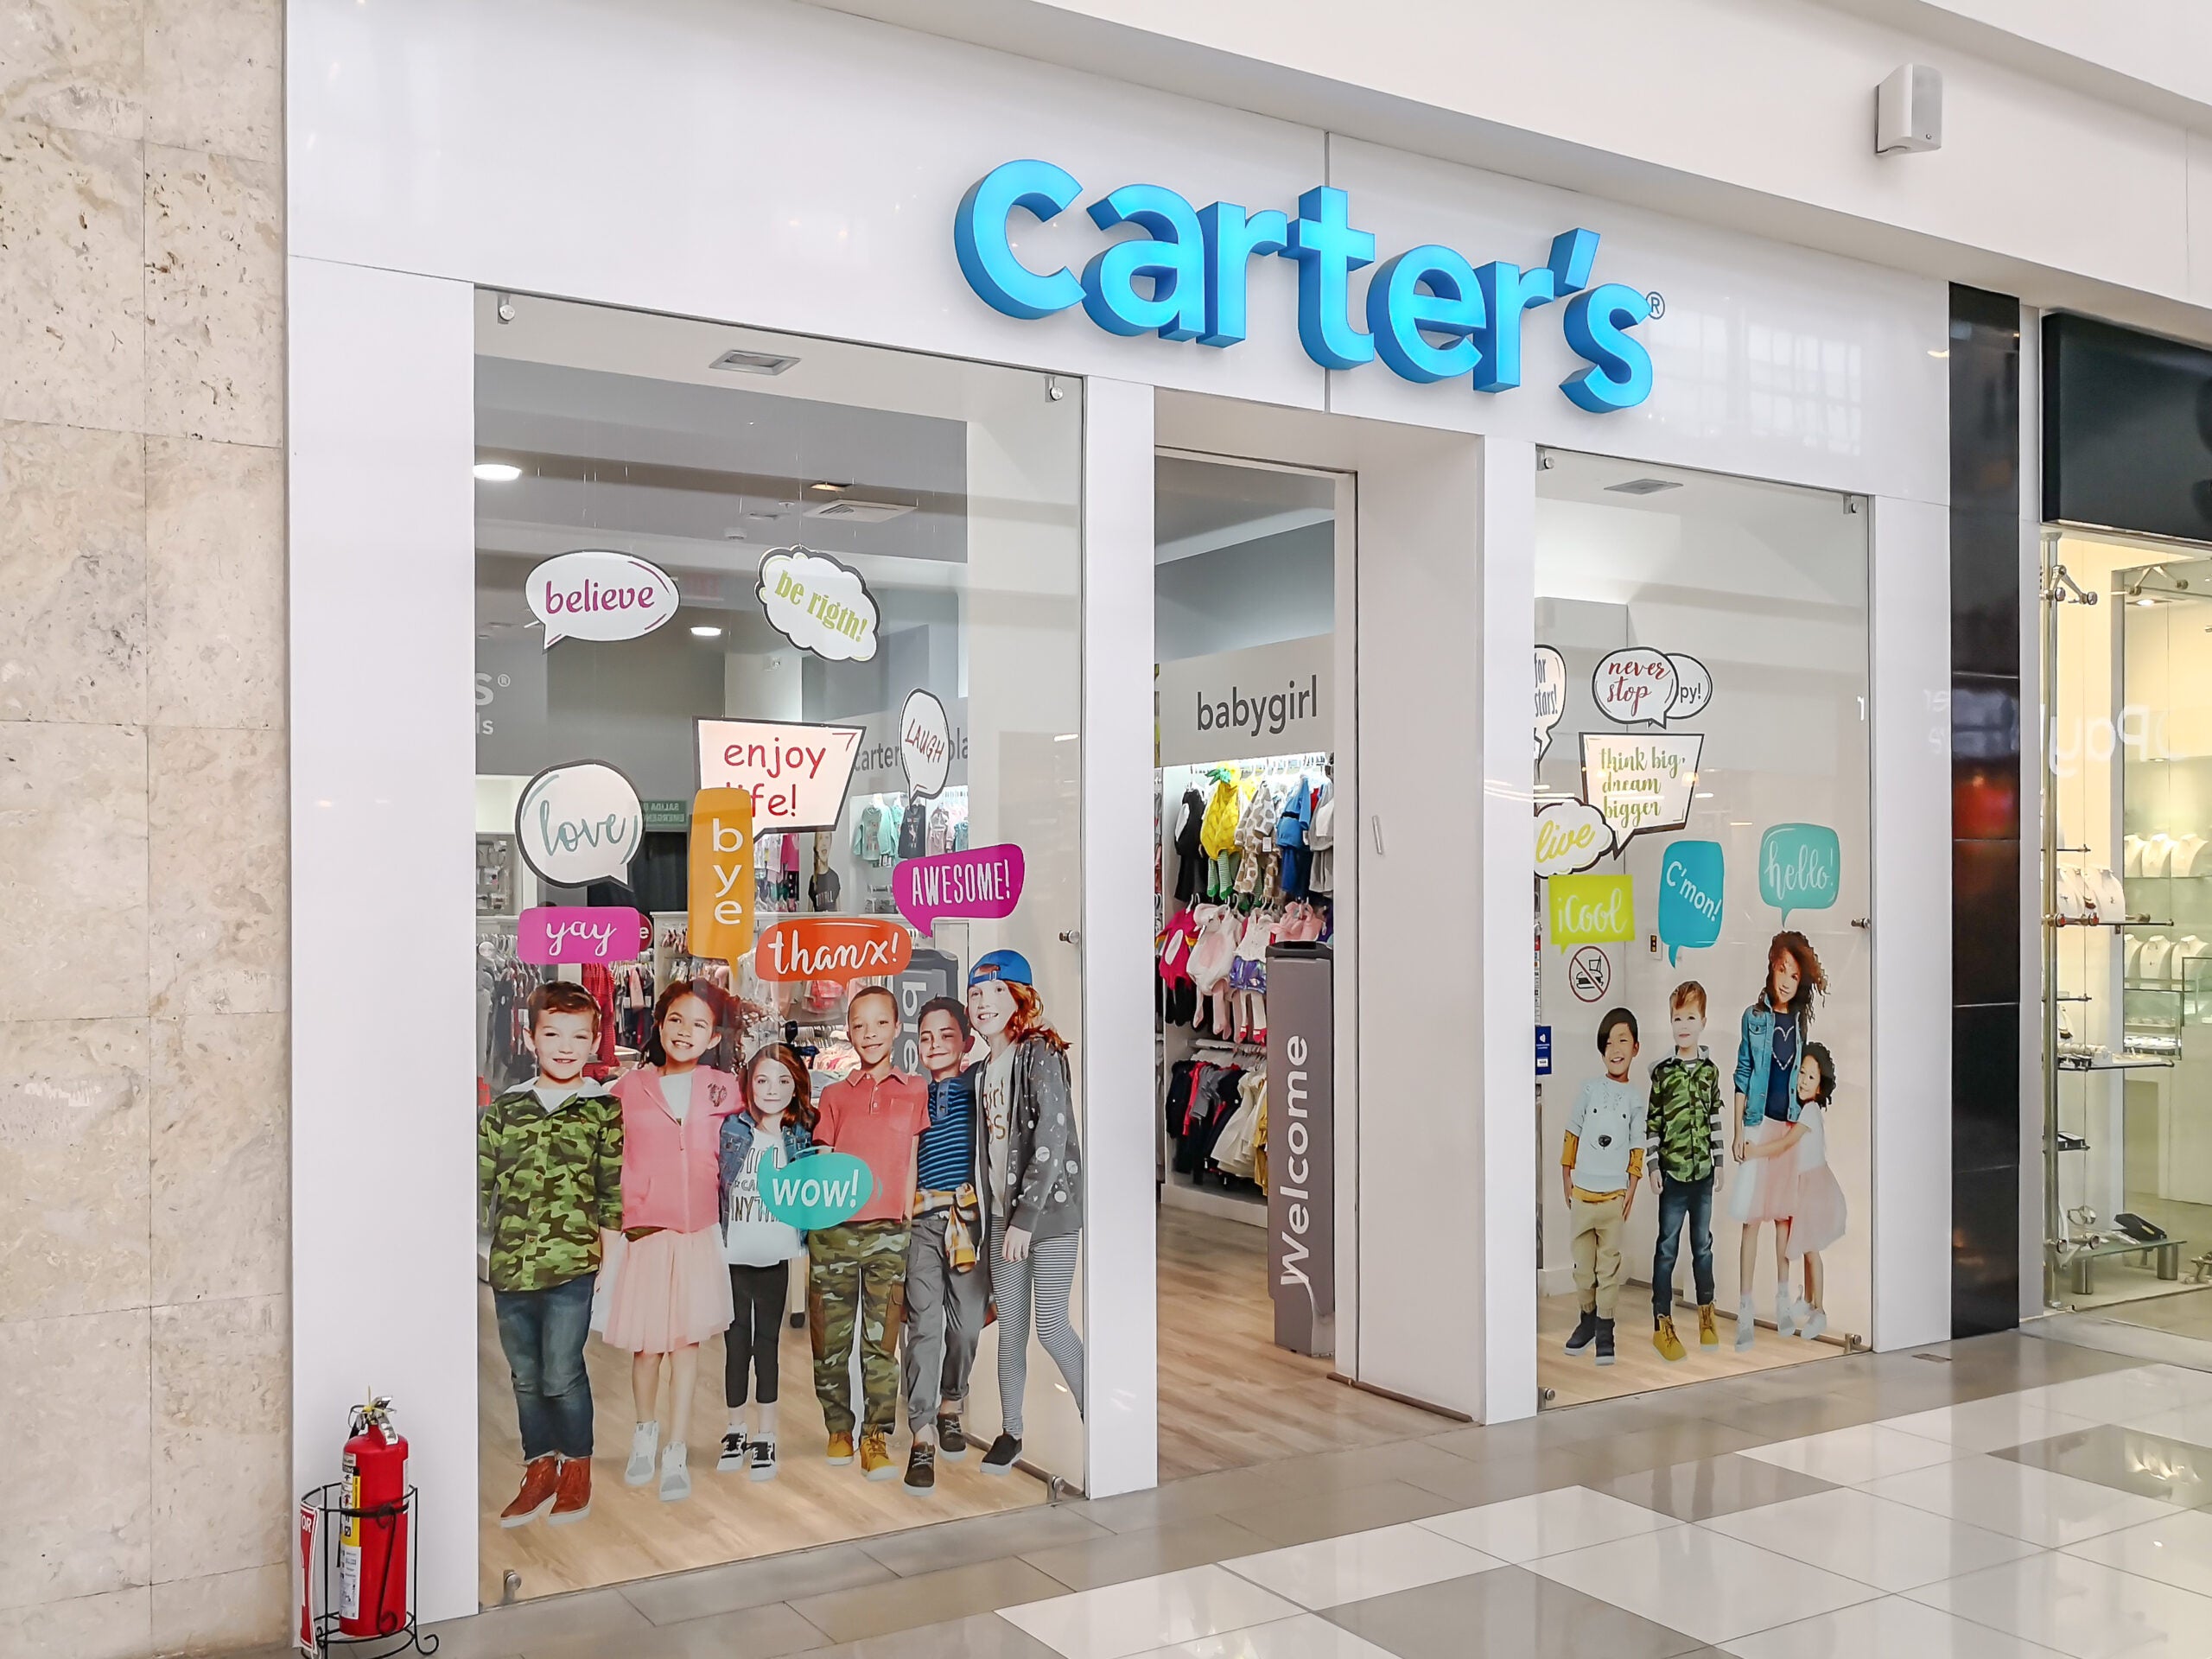 Carter's Reroutes Goods Amid Higher Freight Rates, Product Costs